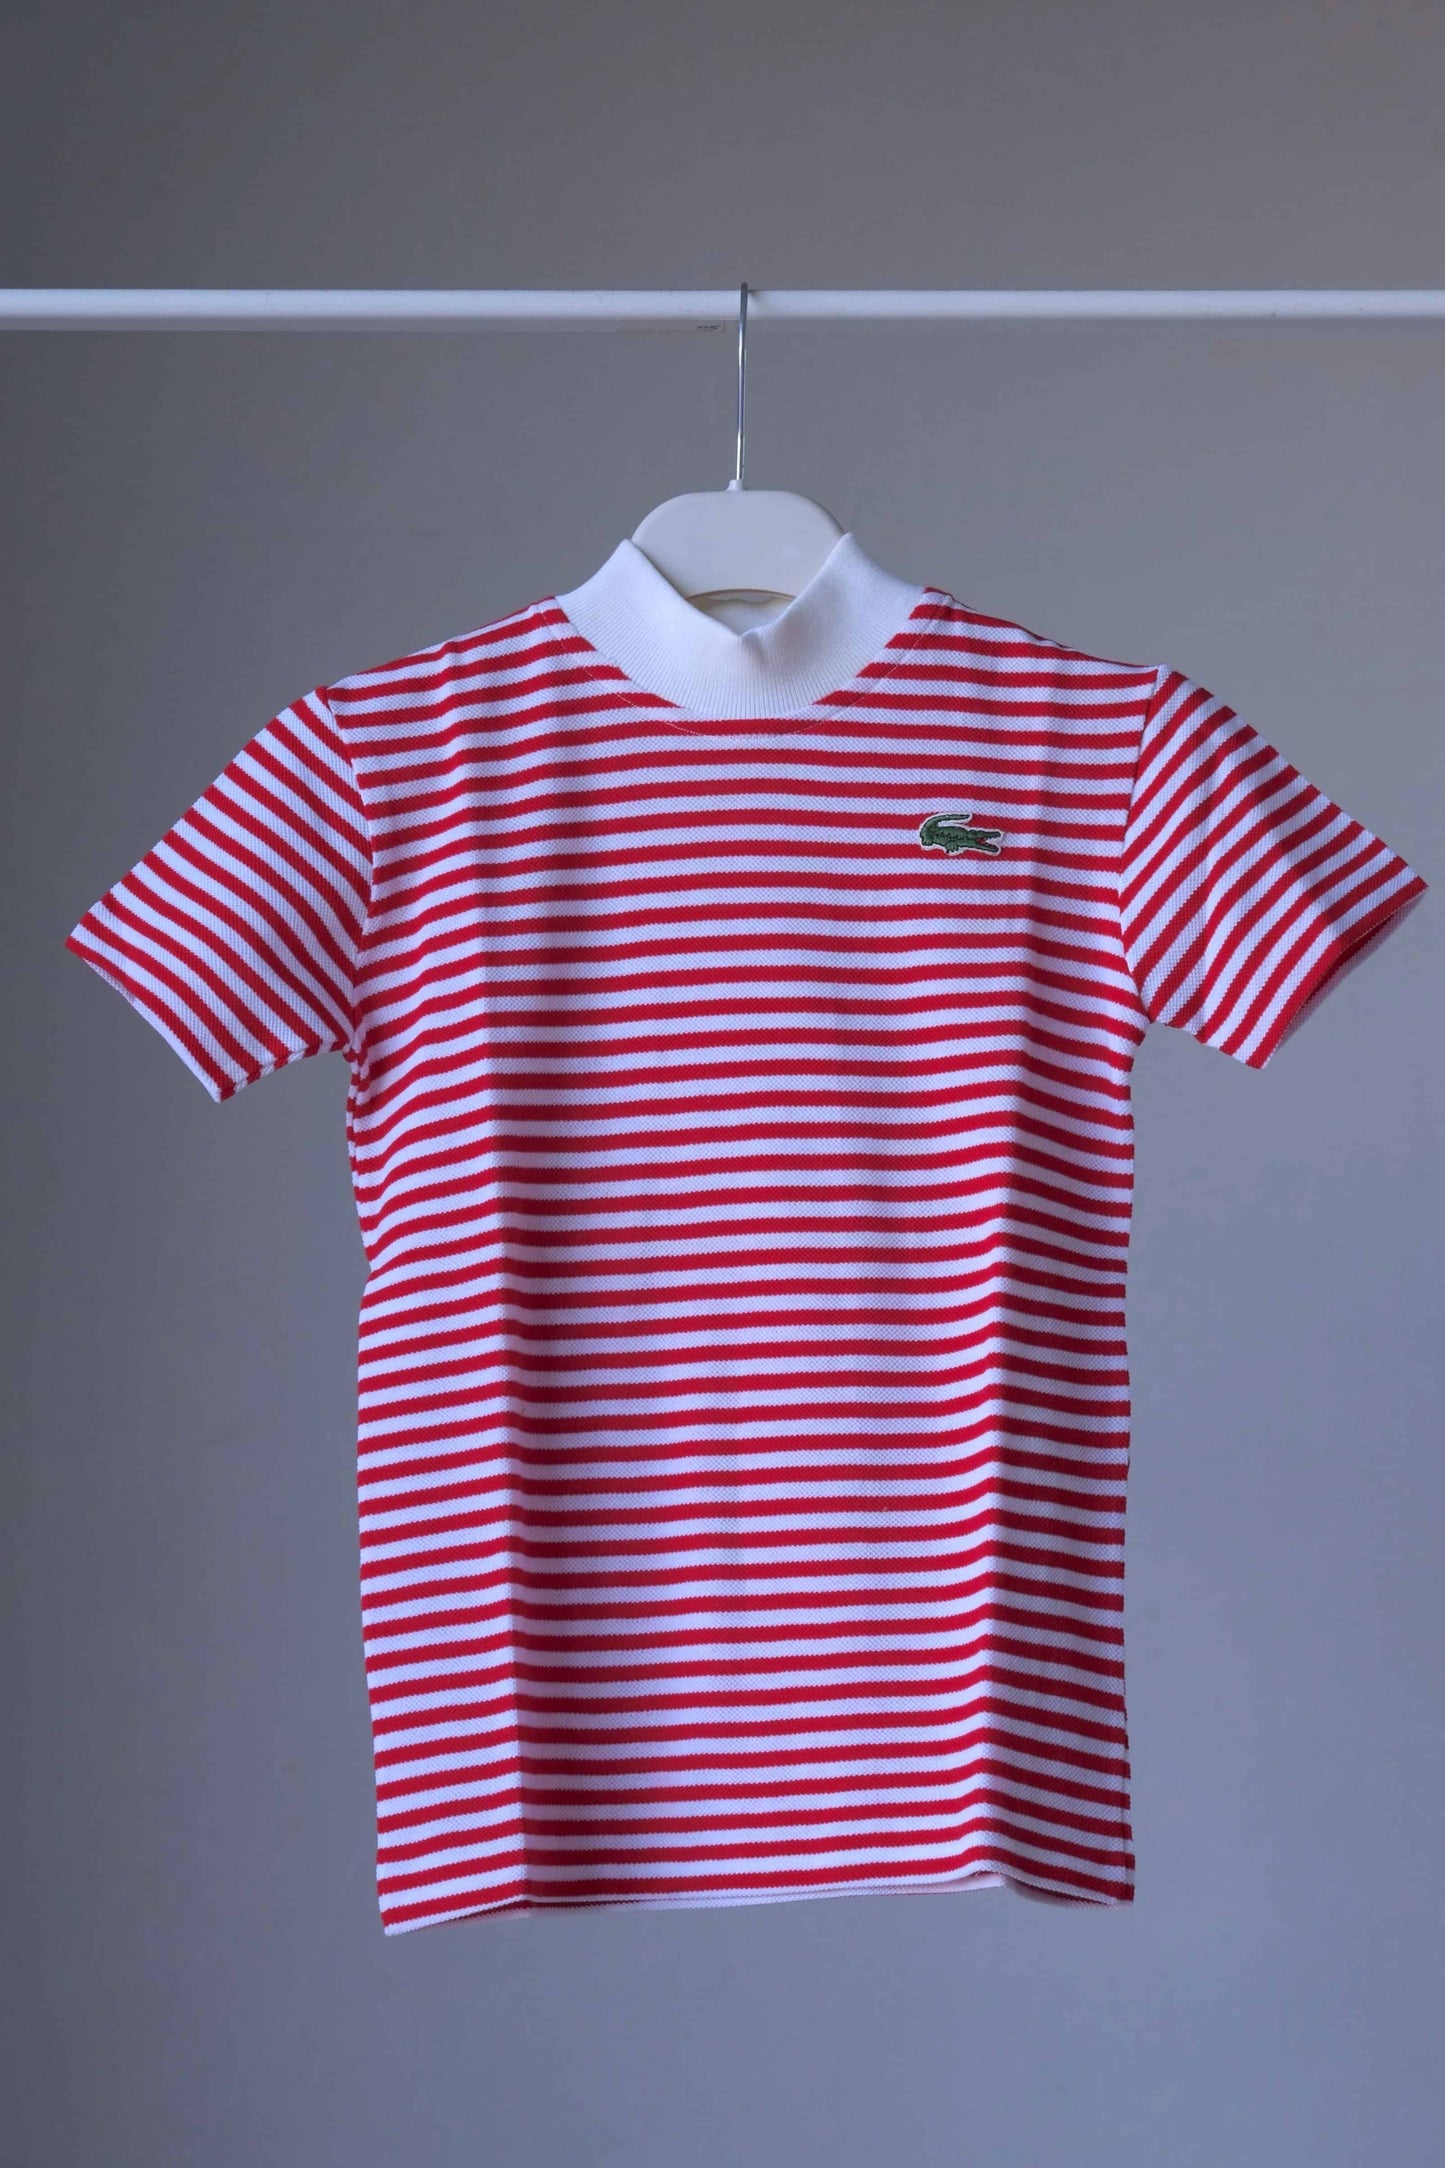 LACOSTE Striped Shirt in red and white stripes